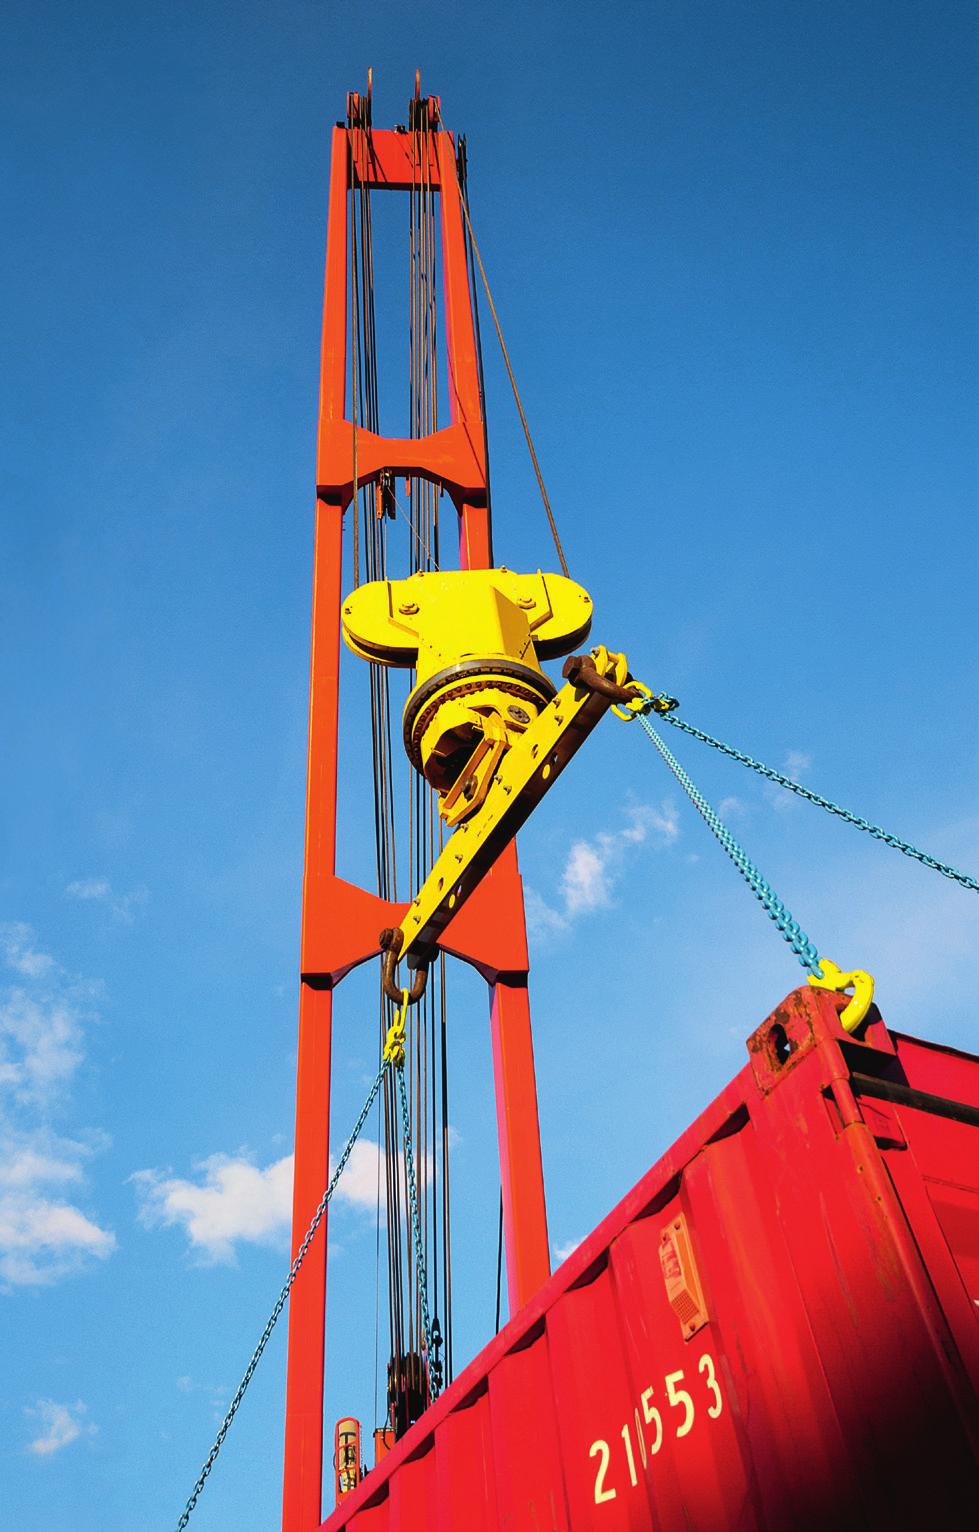 Accessories and extras MacGregor cranes can easily be furnished with a variety of extra equipment to improve overall visibility, reliability and performance.